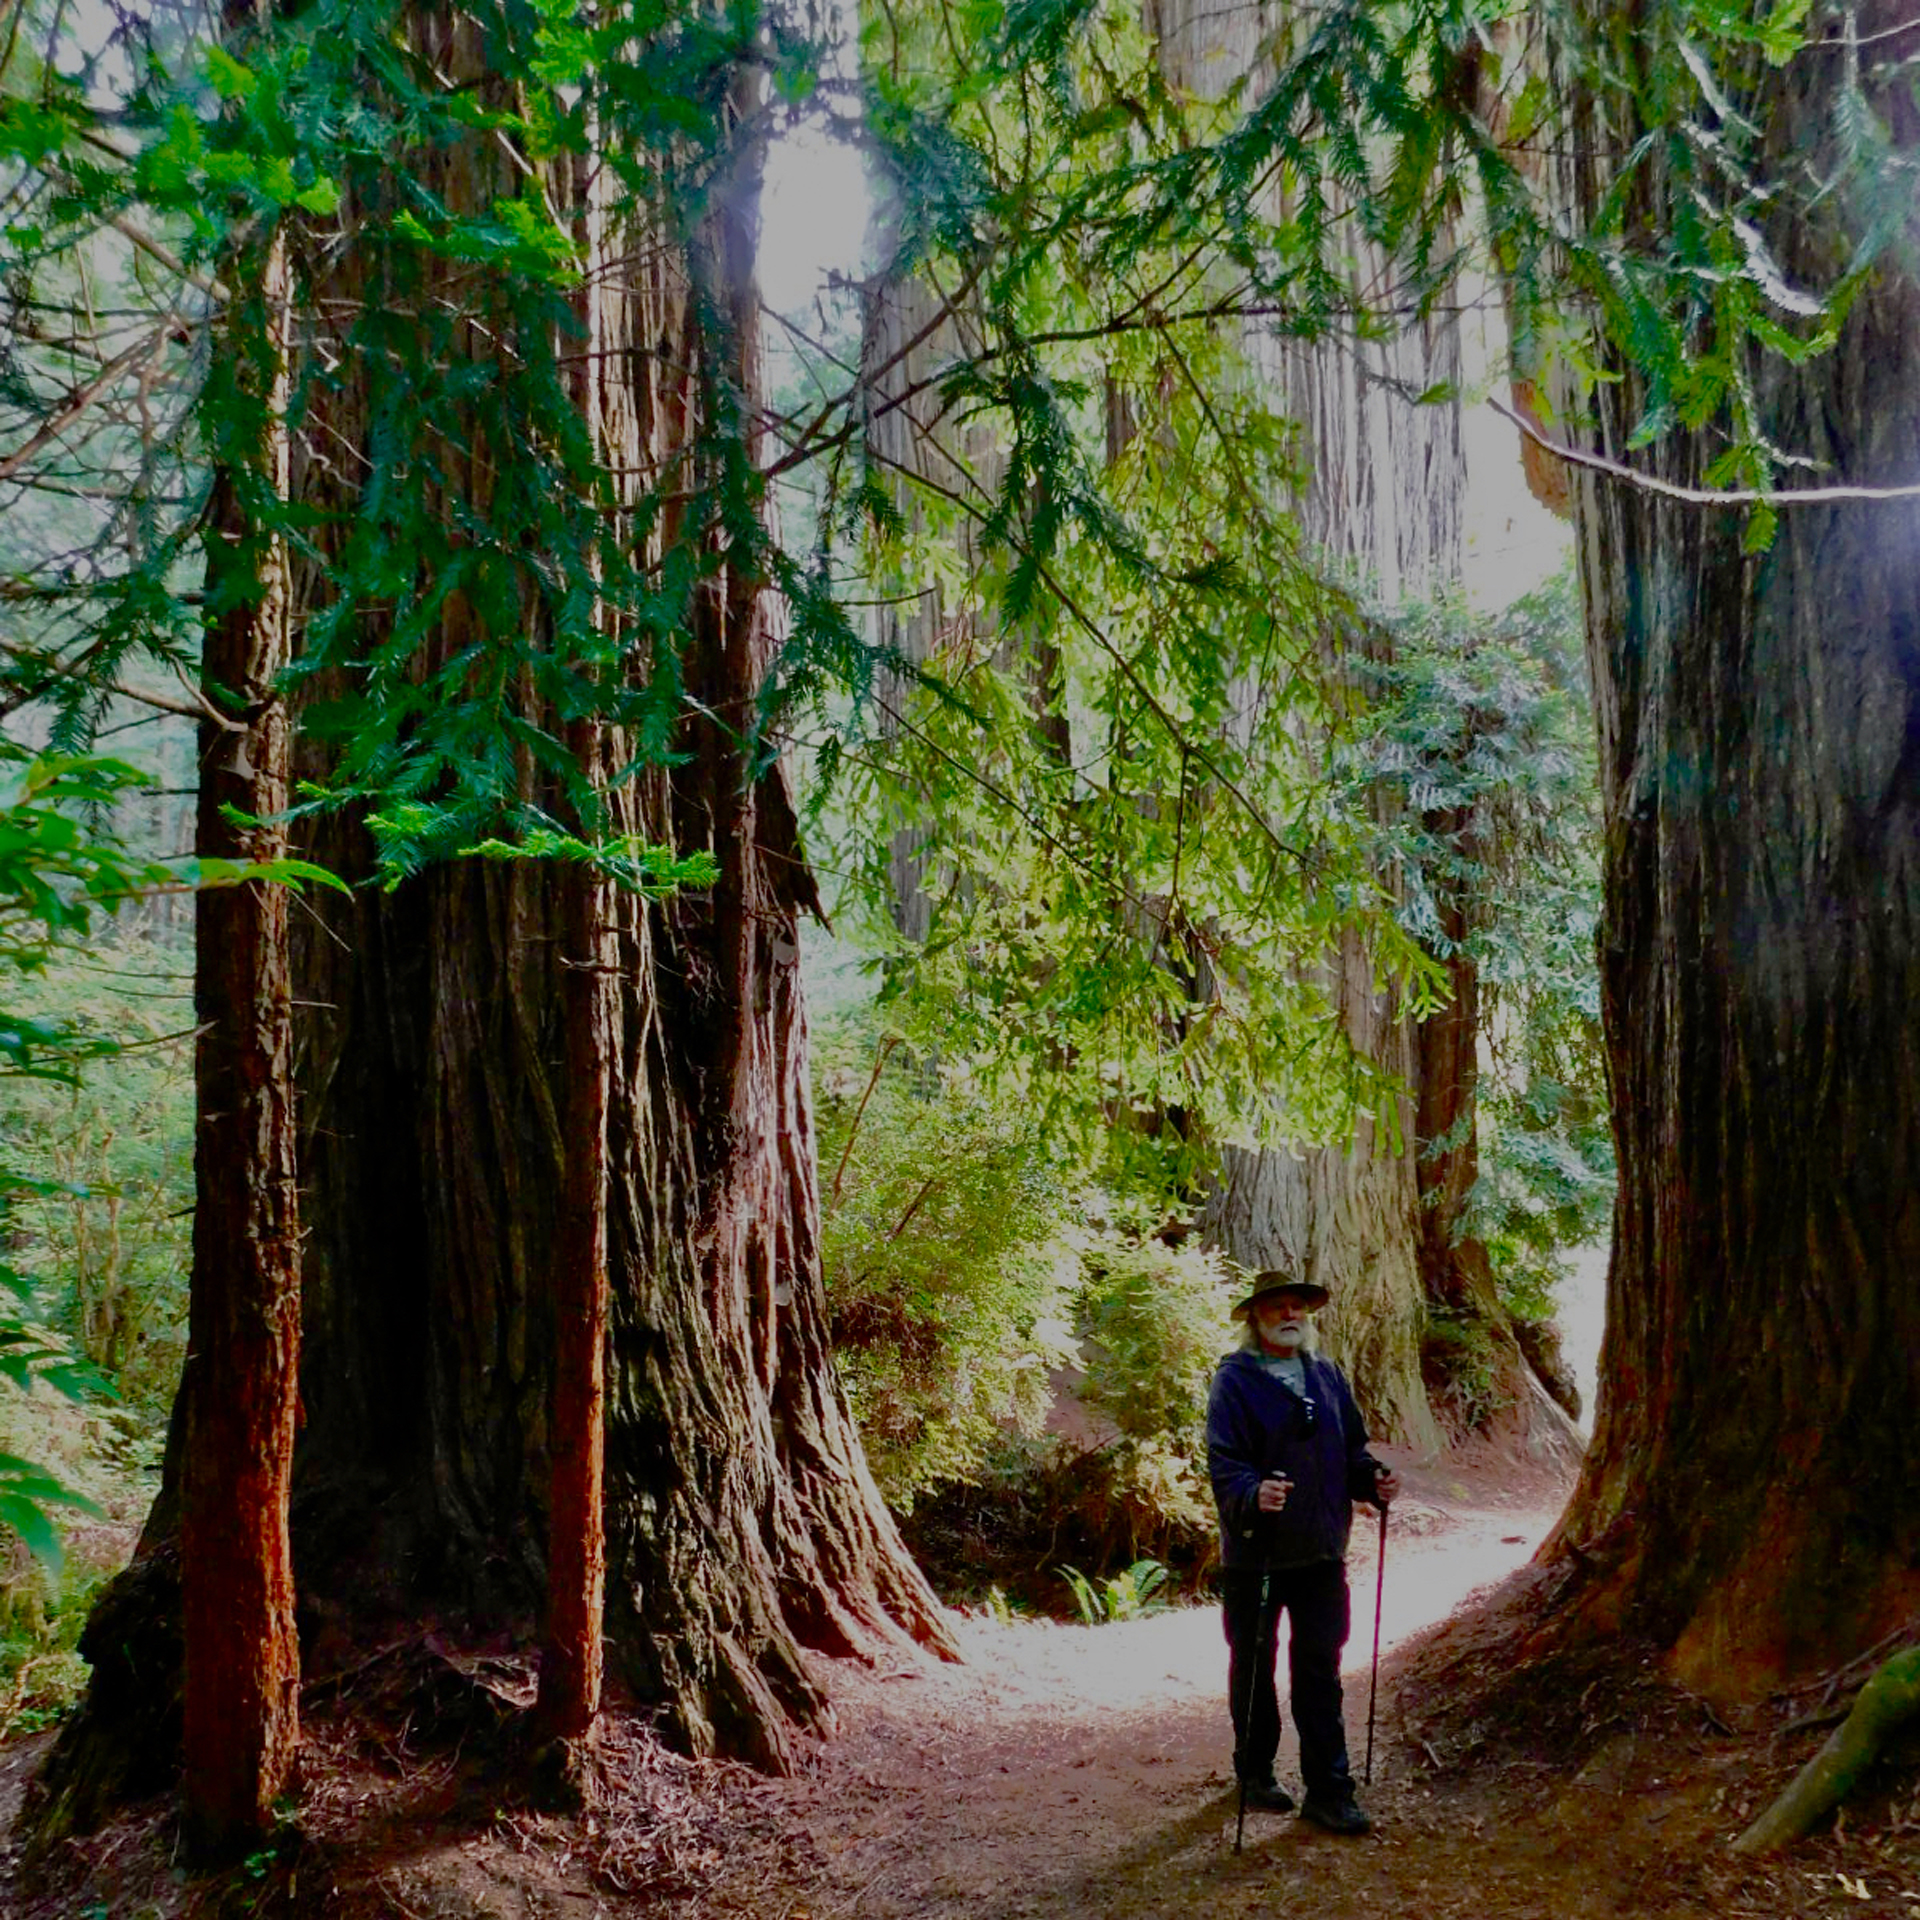 Jim hiking by the Redwood trees